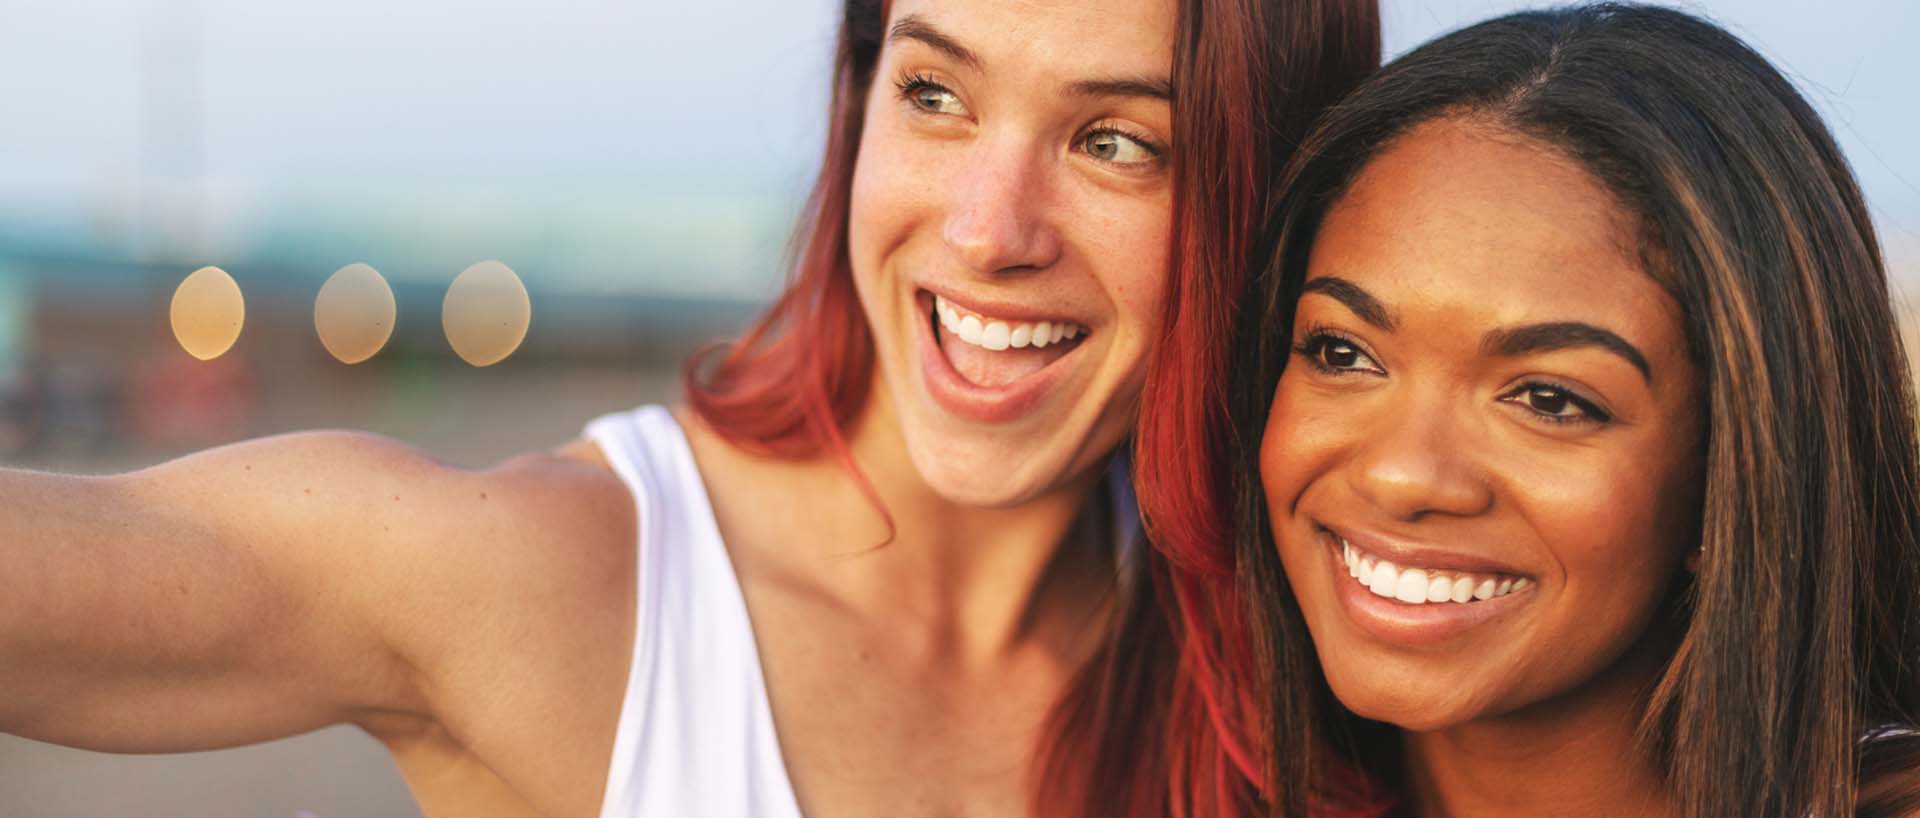 Two women together smiling